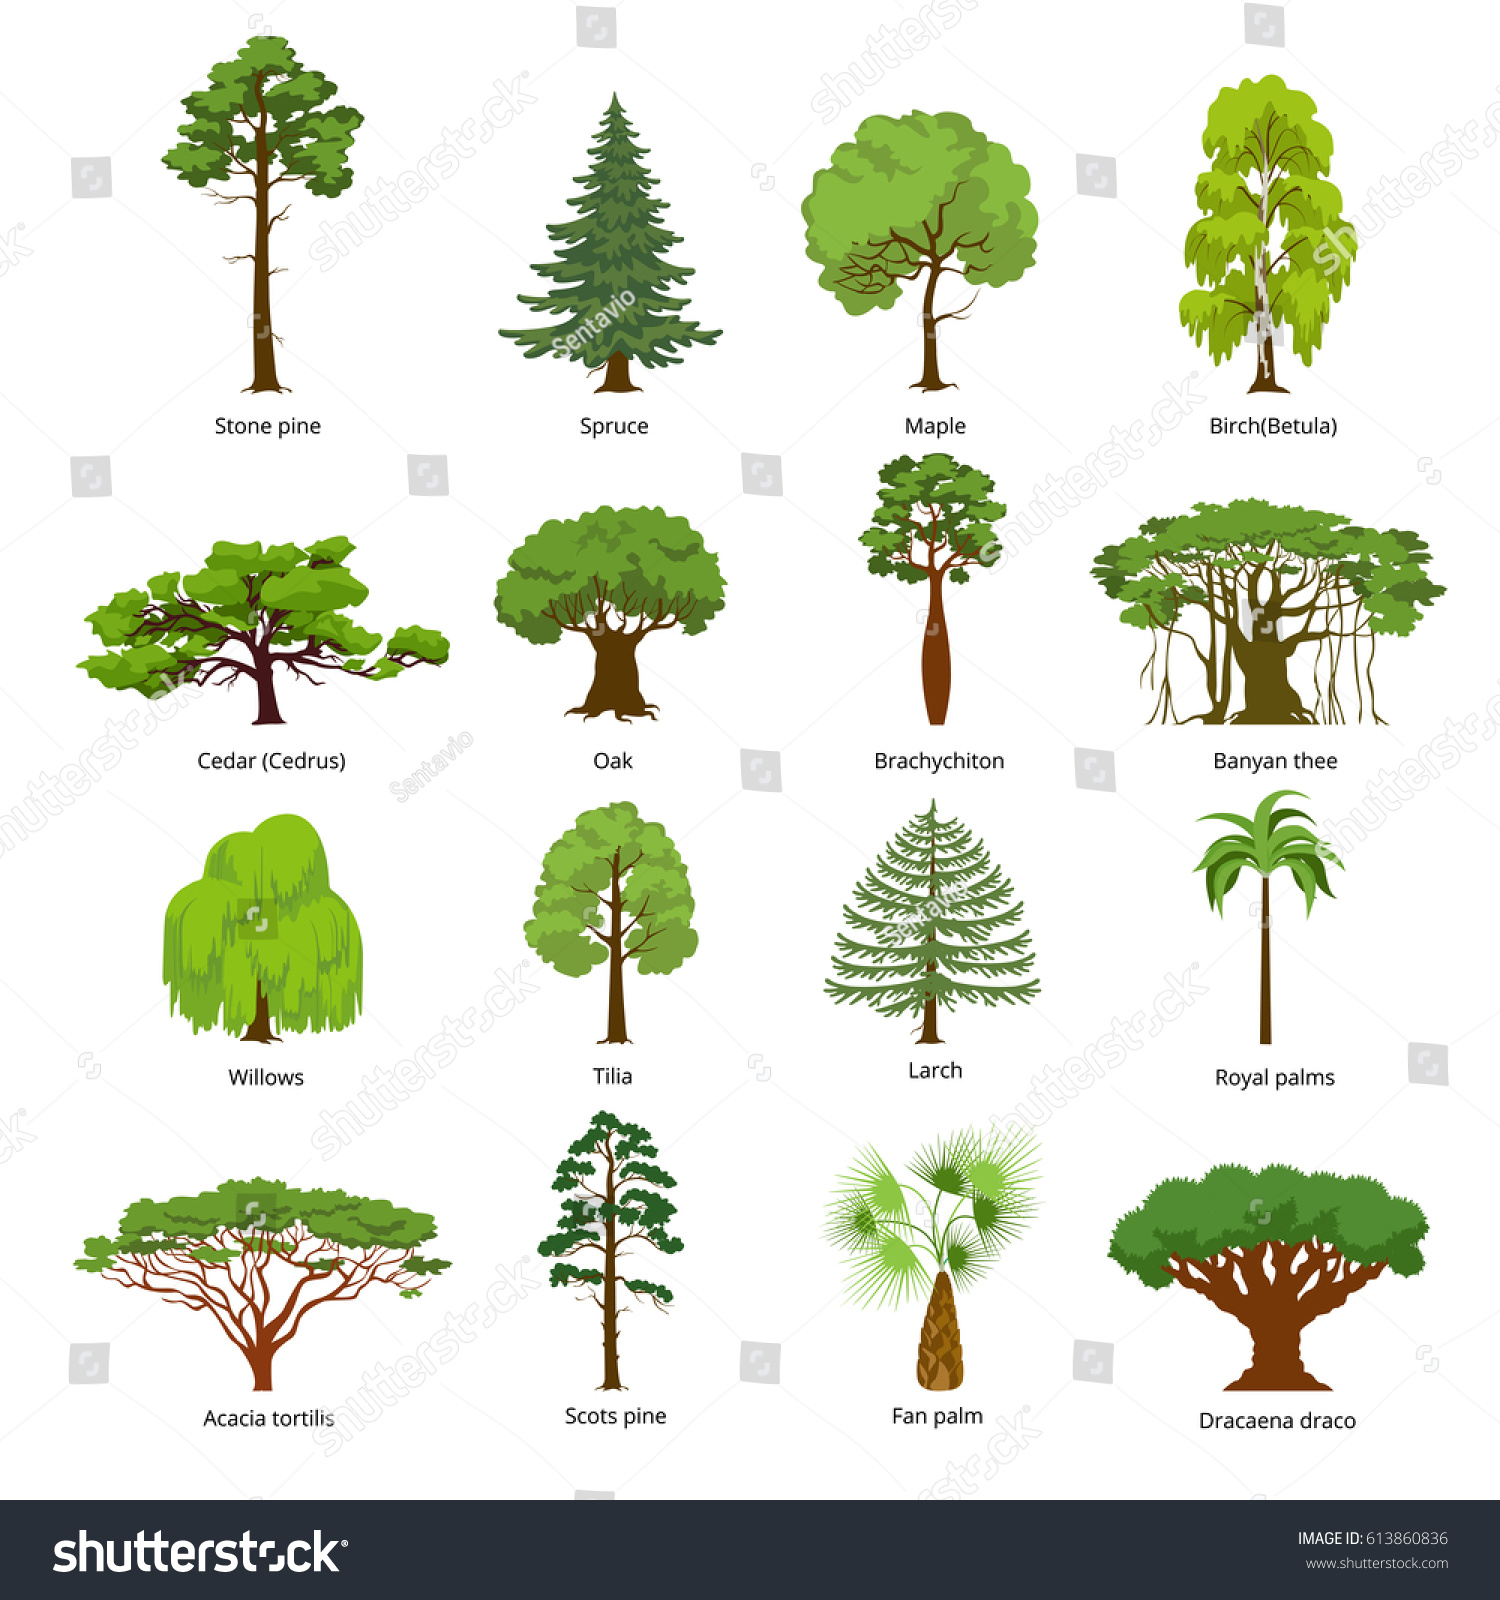 SVG of Flat green trees vector illustration set. Stone pine, spruce, maple, birch, cedar, oak, brachychiton, banyan, willow, larch, palm, scots pine forest tree icons. Nature concept. svg